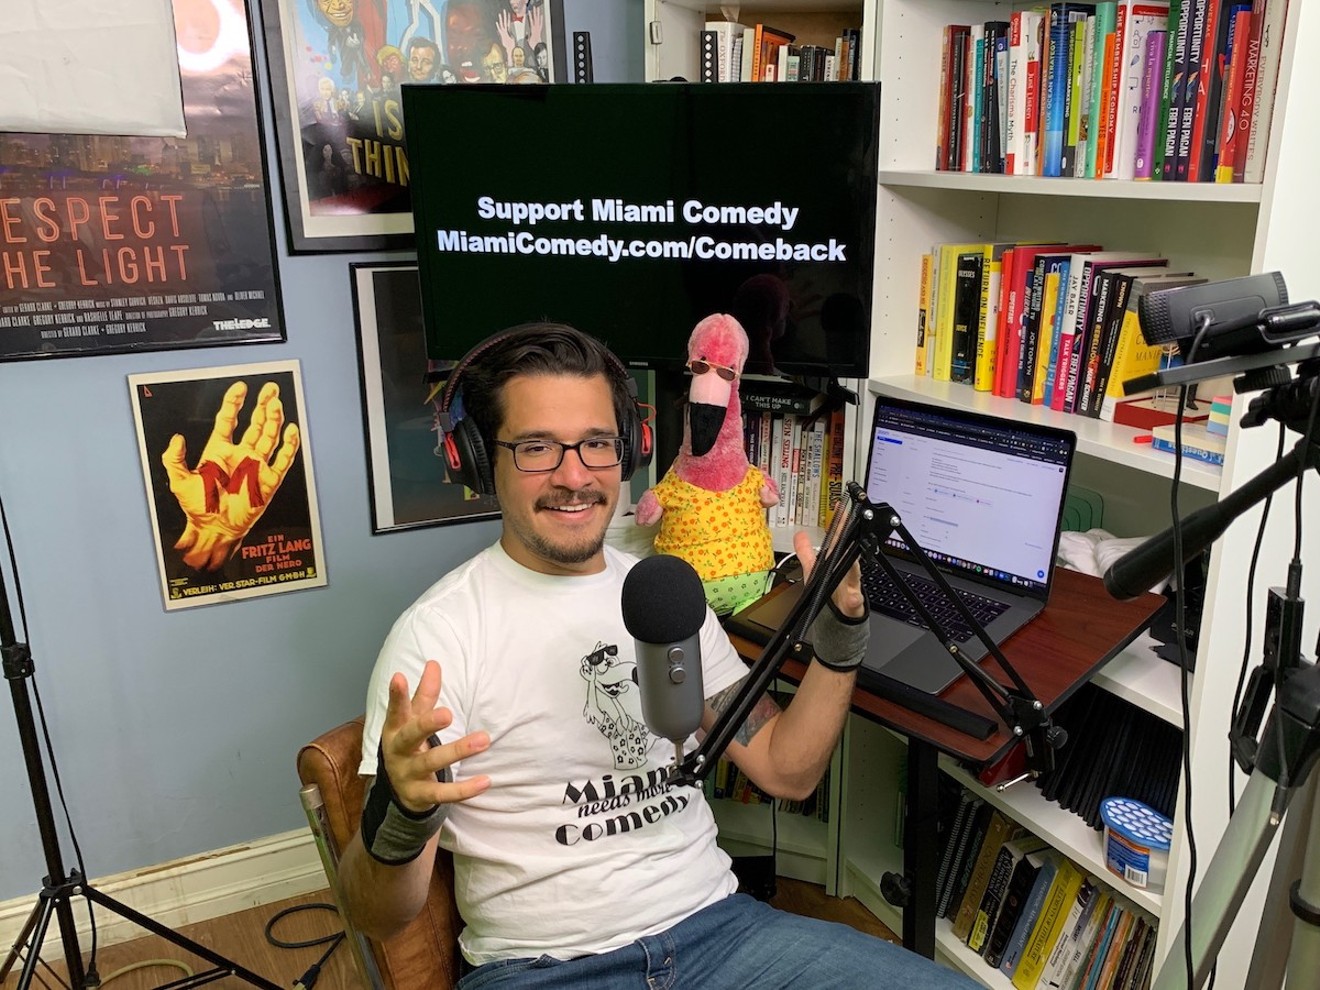 Manny Garavito broadcasts the Miami Comedy podcast from his bedroom.